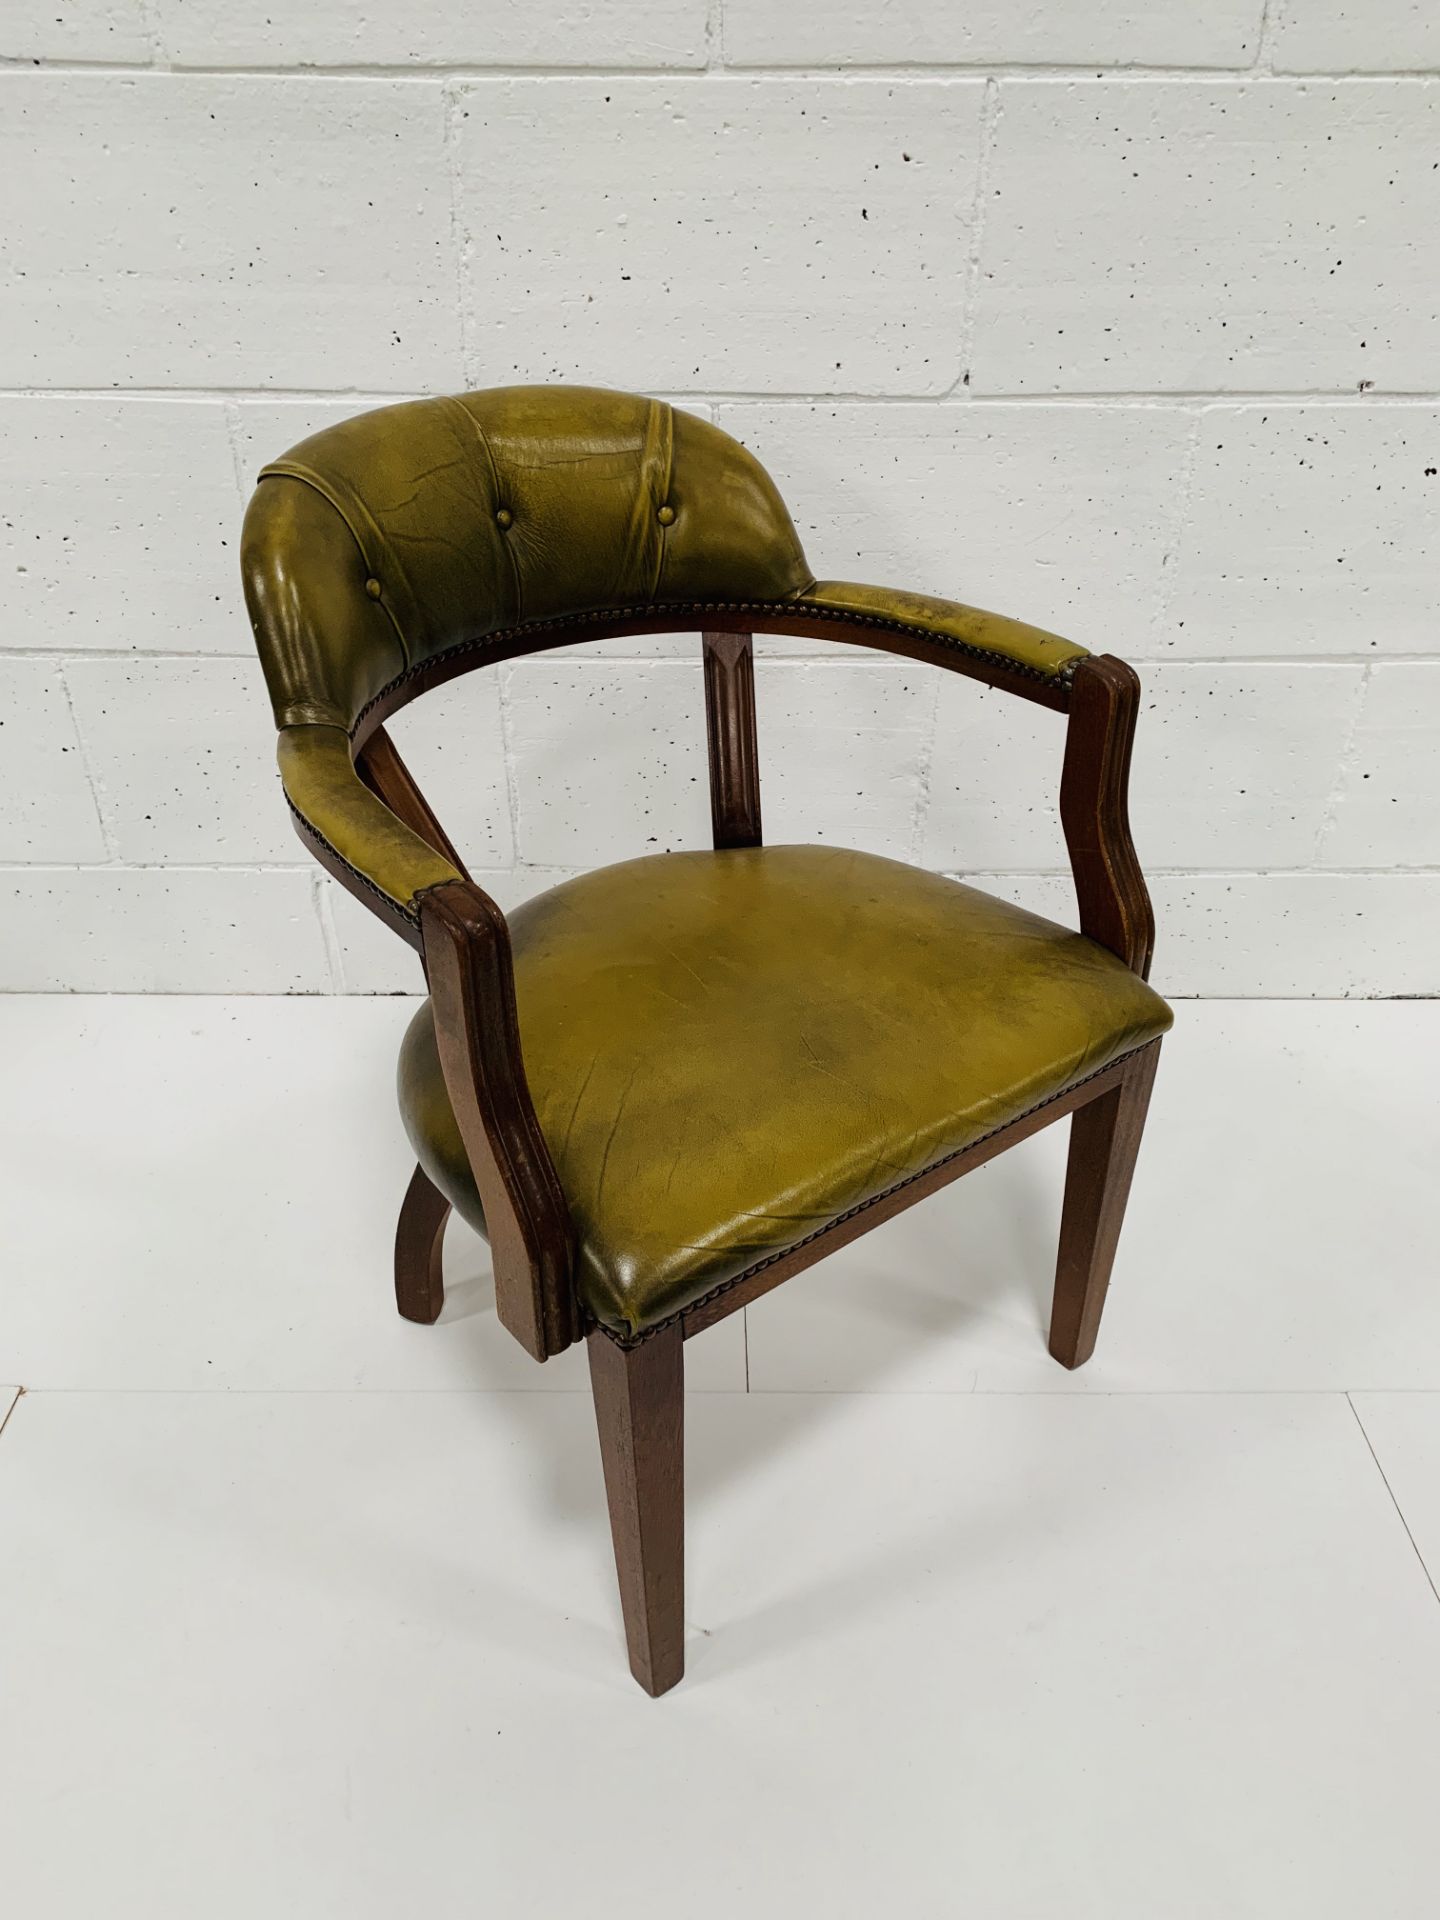 Green leather open armchair. - Image 2 of 3